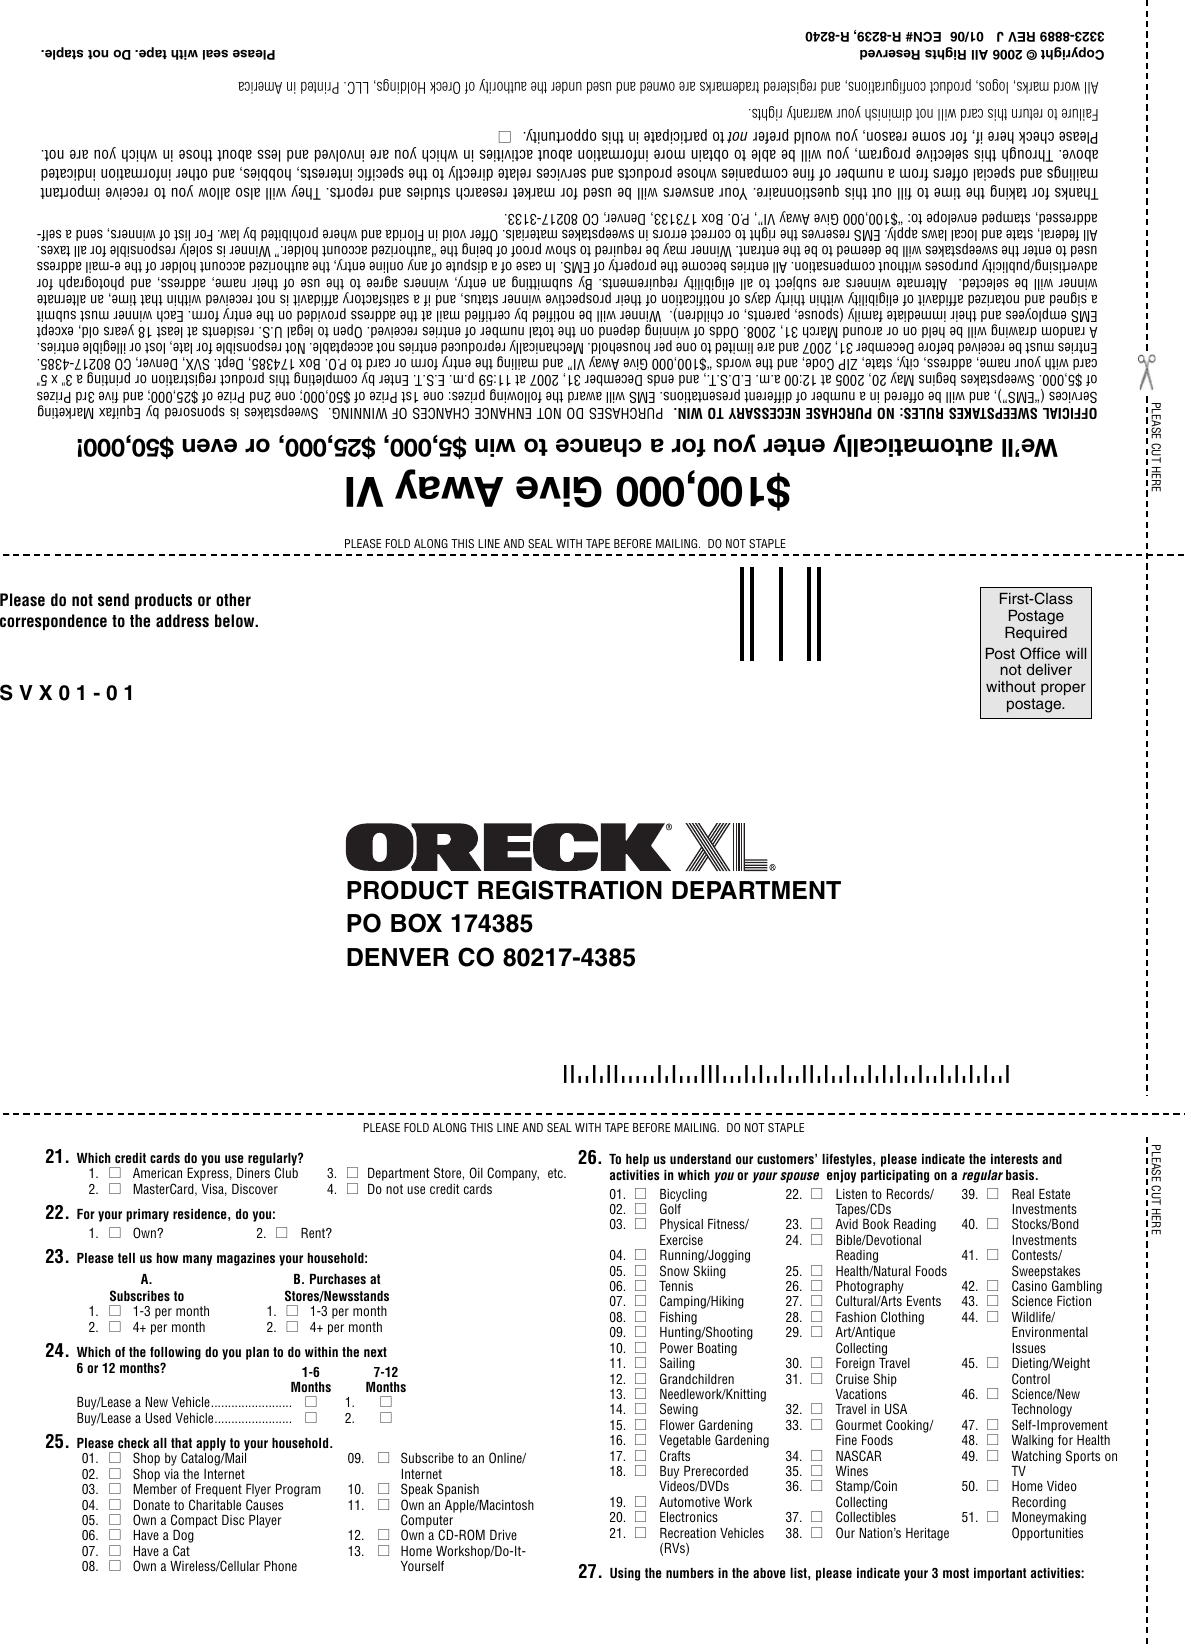 Page 12 of 12 - Oreck Oreck-3323-8889Revk-Users-Manual- Air 8 Manual Rev B  Oreck-3323-8889revk-users-manual